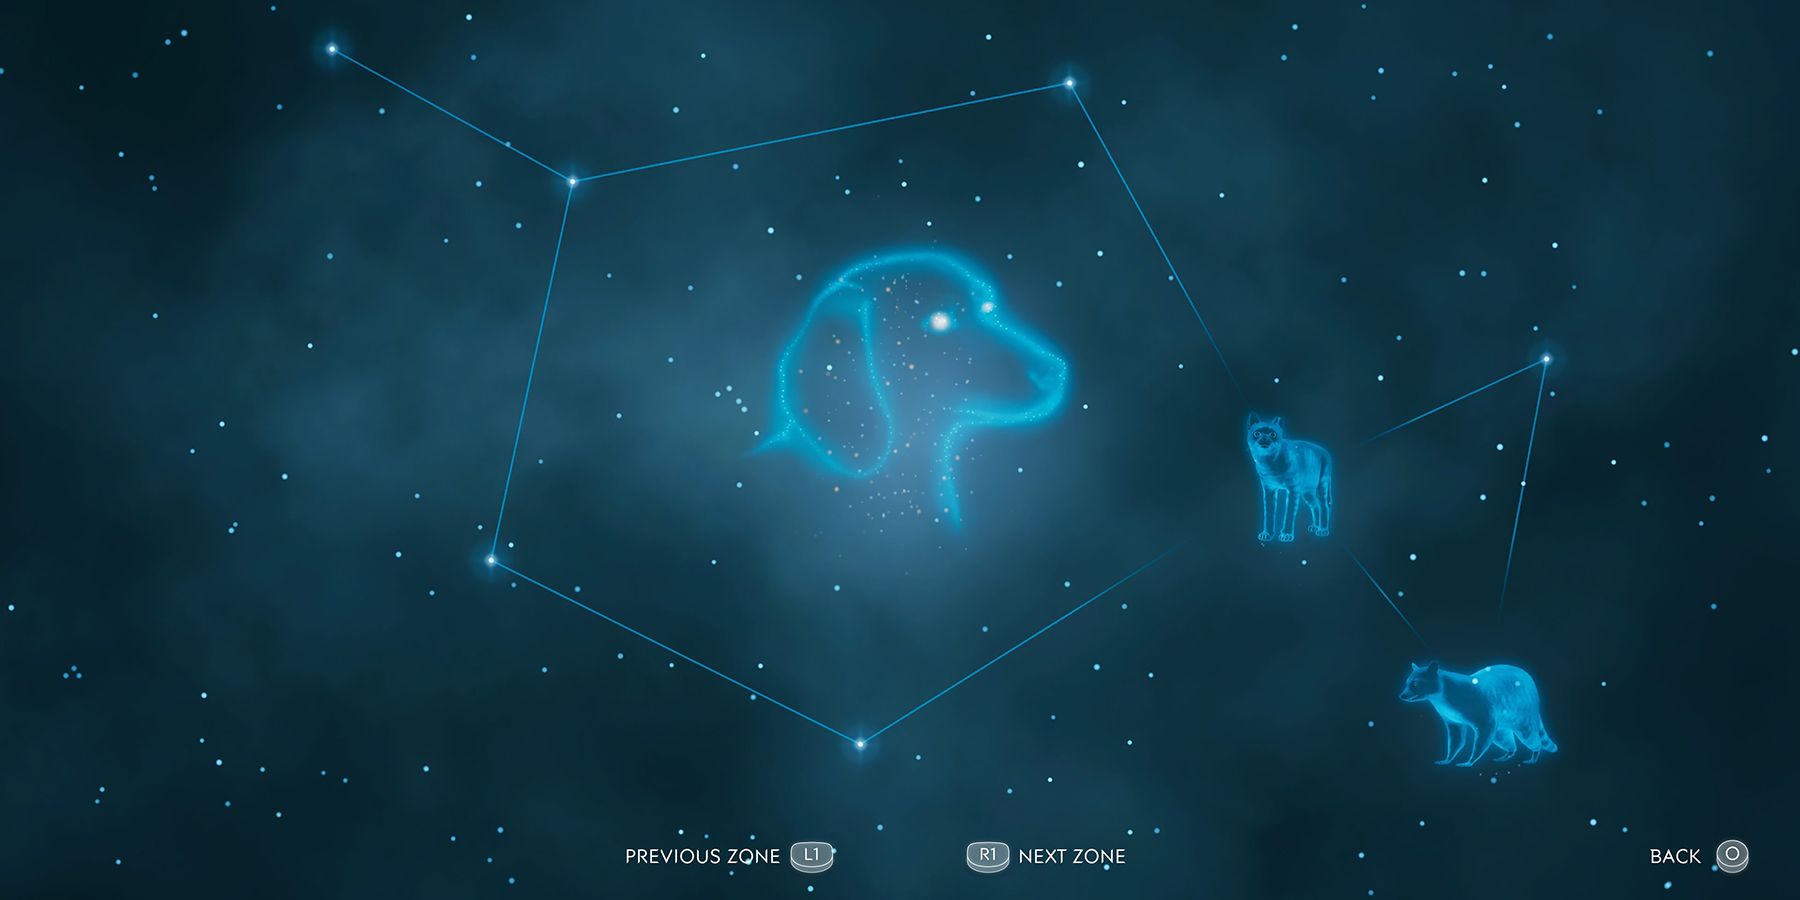 after us dog constellation map